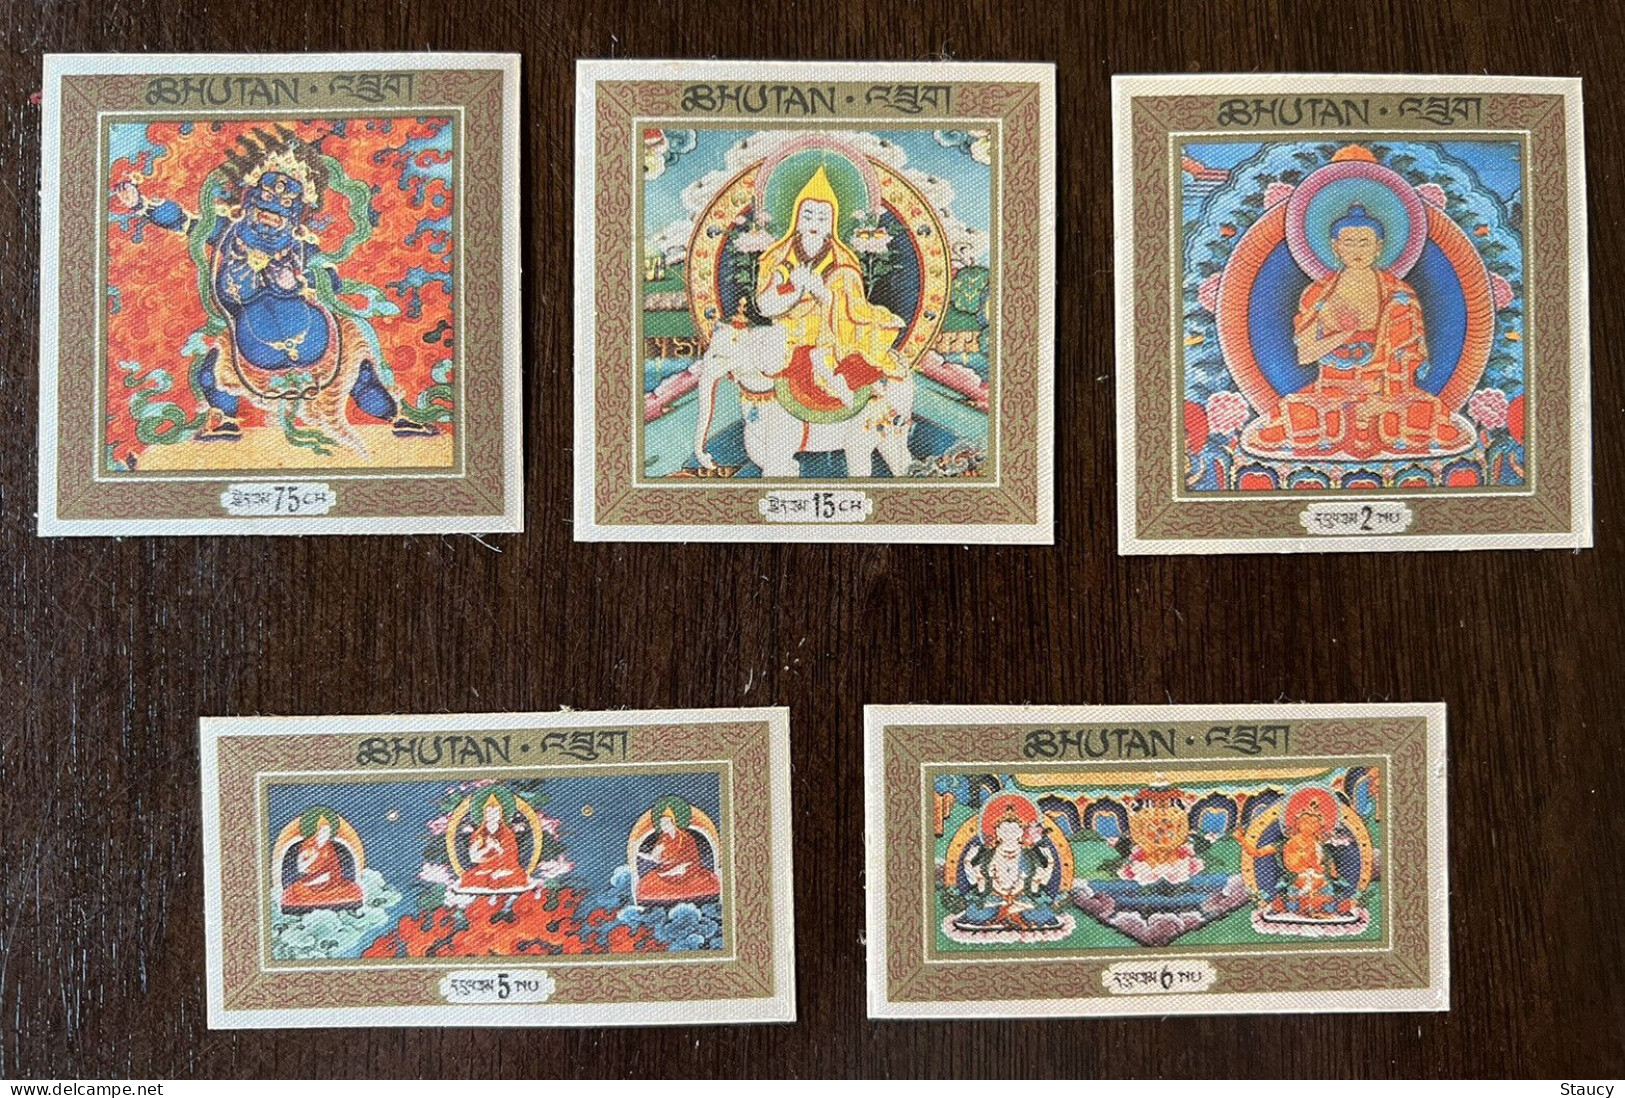 BHUTAN 1969 "Imperf" RELIGIOUS THANKA PAINTINGS BUDHA - SILK CLOTH Unique 5v Stamps SET "Imperf" MINT, As Per Scan - Buddhism